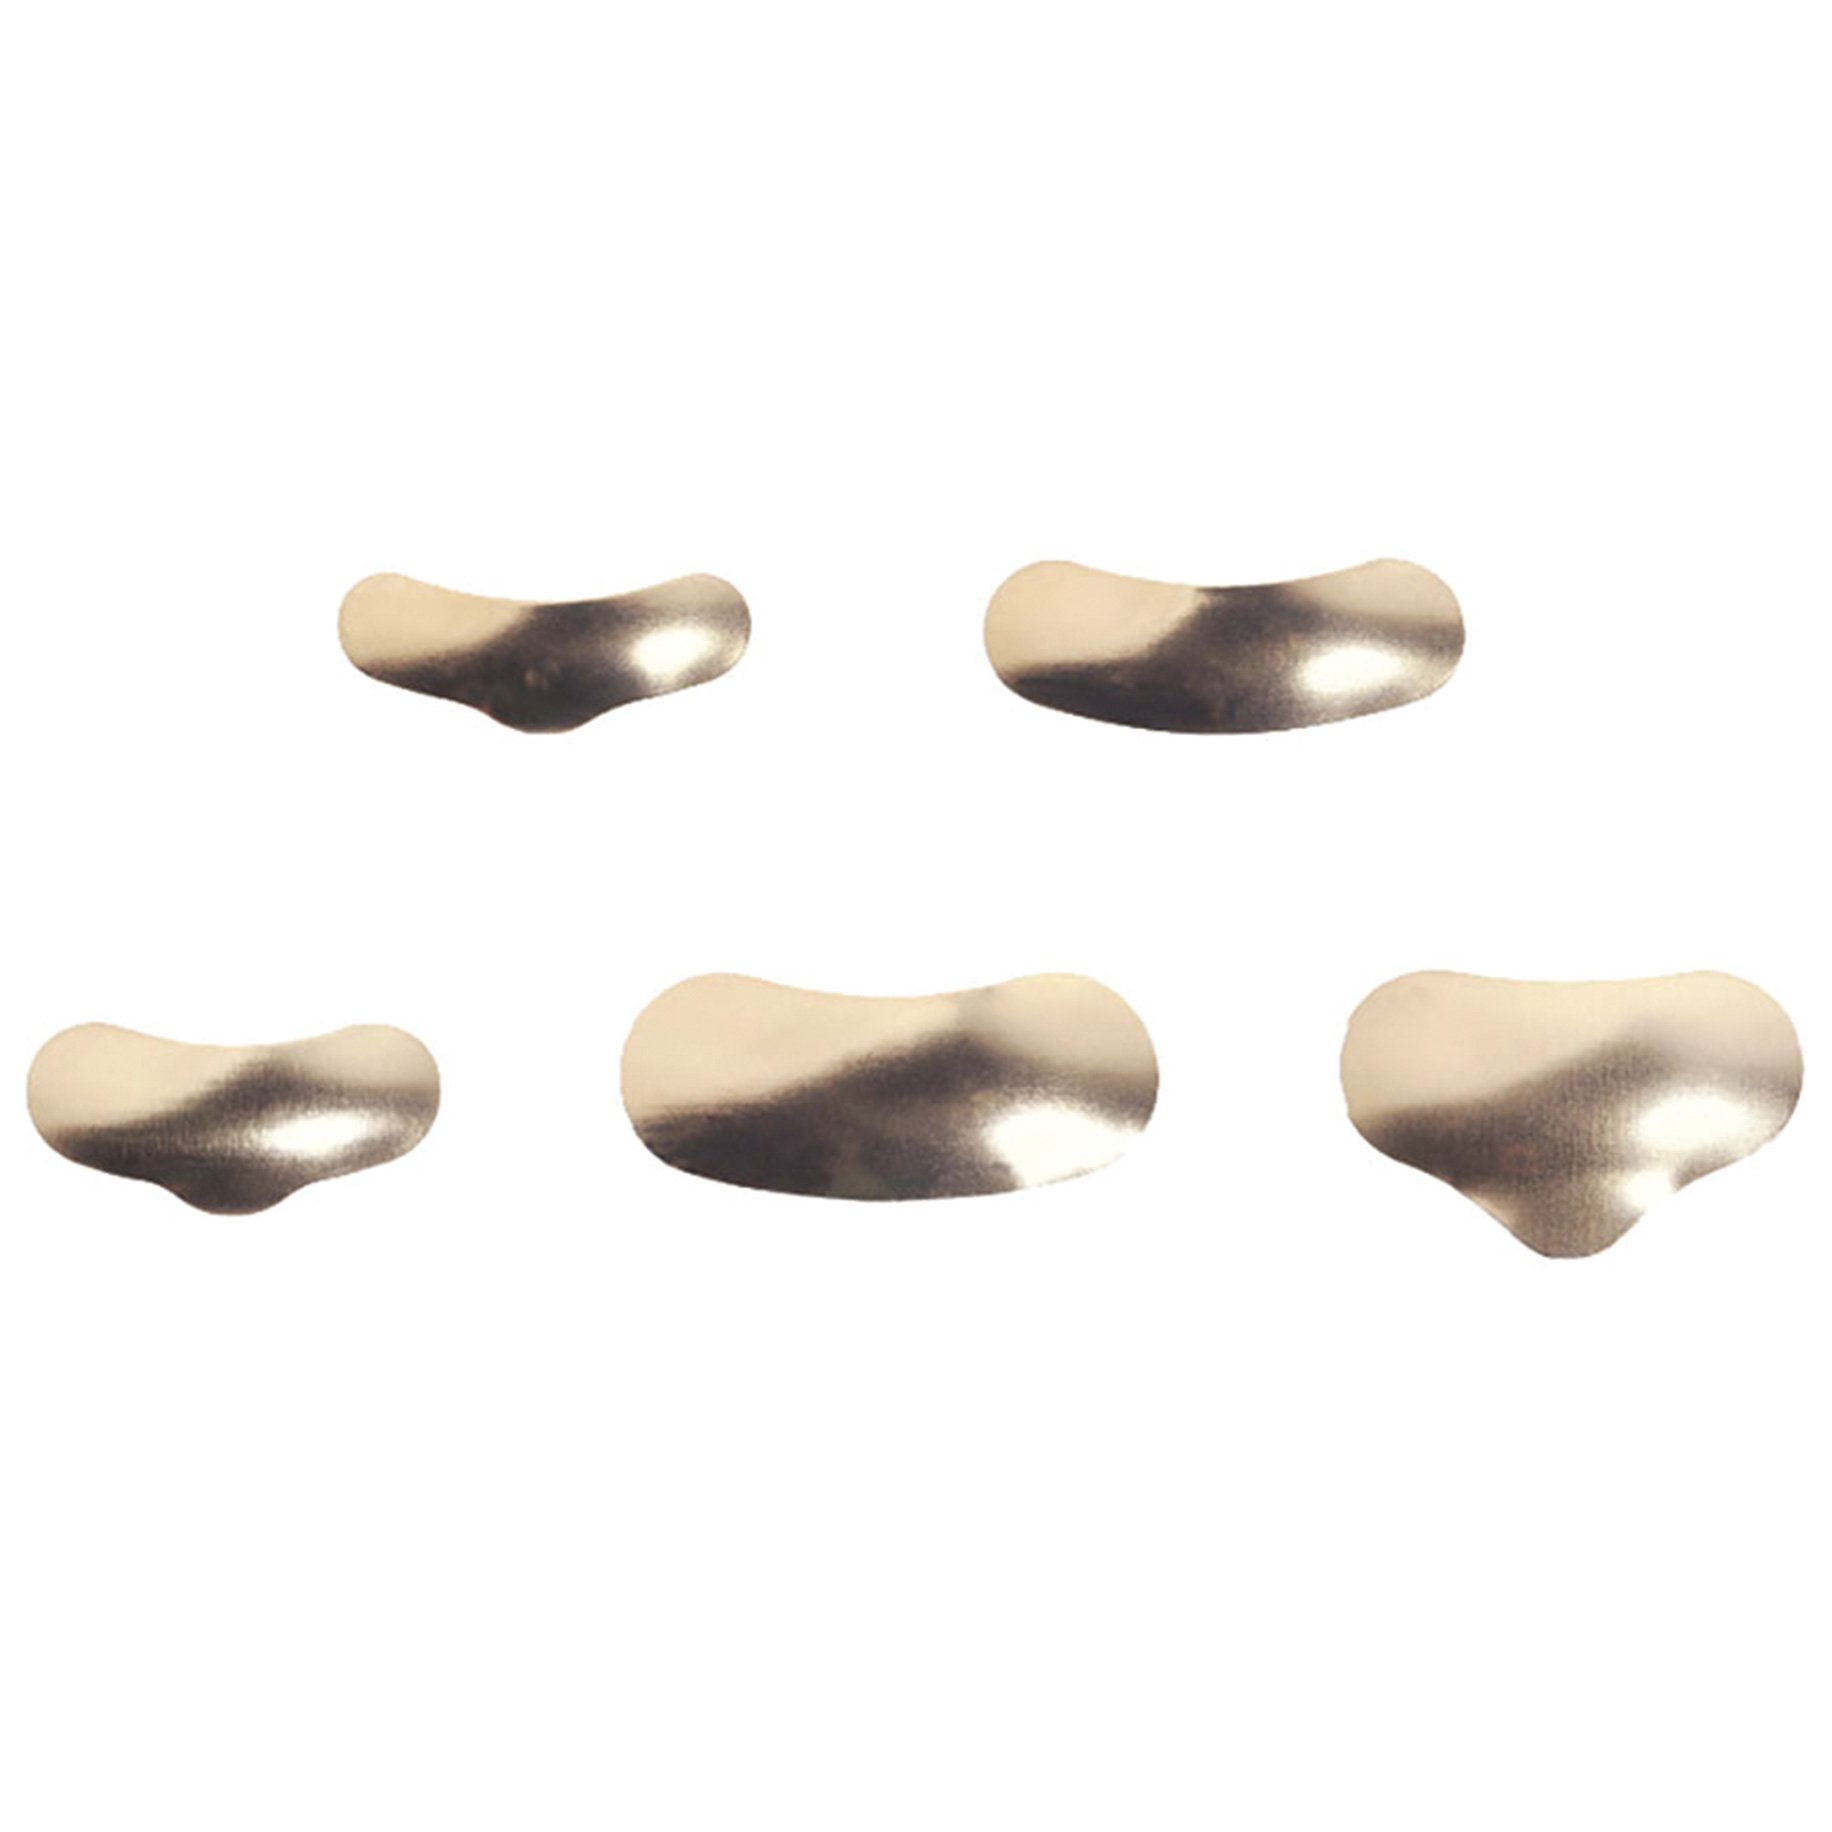 Composi-Tight Gold Extended Small Size Matrix Bands (AU150) 